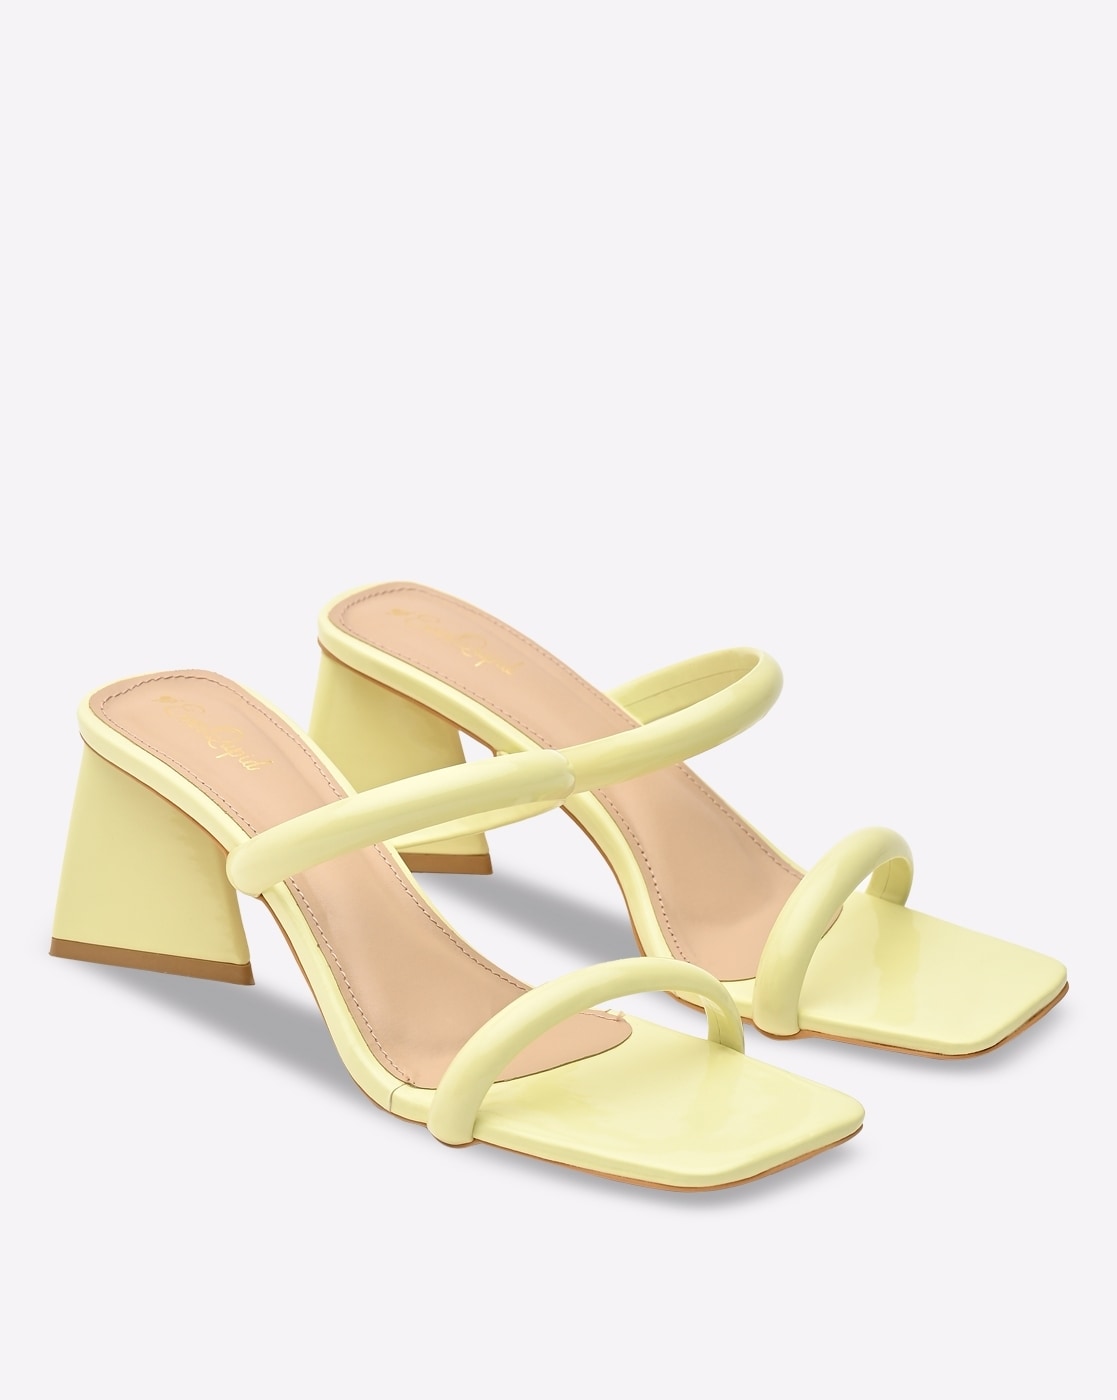 H&M - Let your feet out and cover them in sunlight. #HM Sandal Light yellow:  1043284002 | Facebook